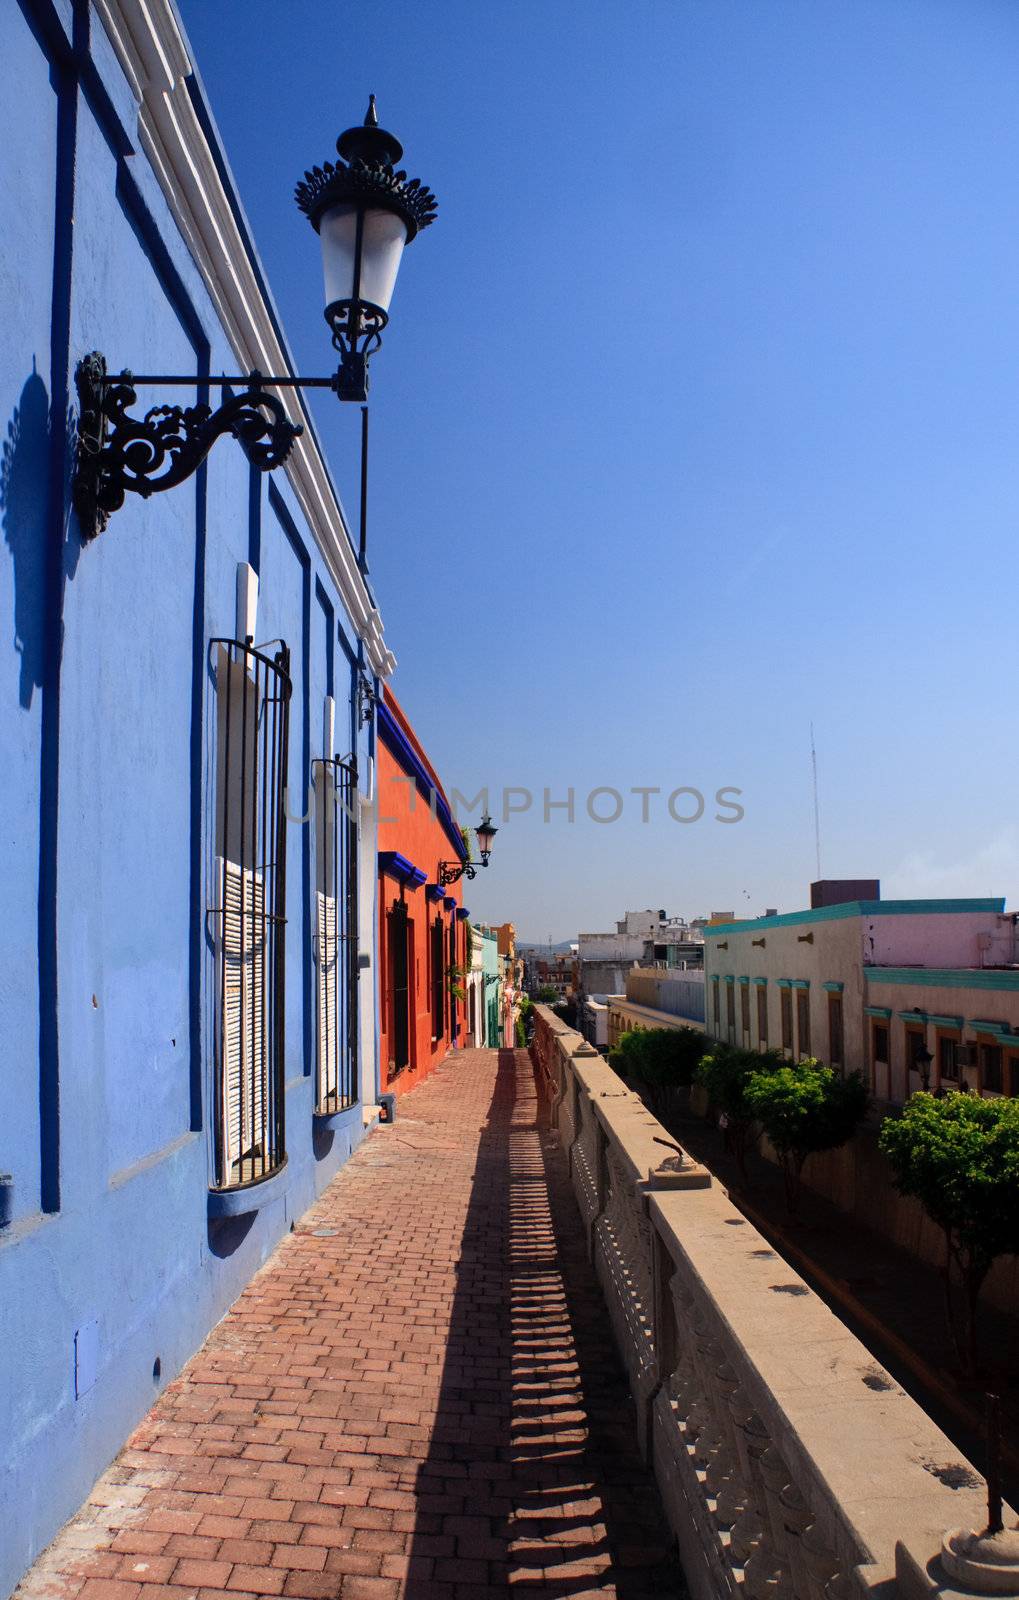 Bright blue and red houses on a tiled pathway in Mazatlan in Mexico